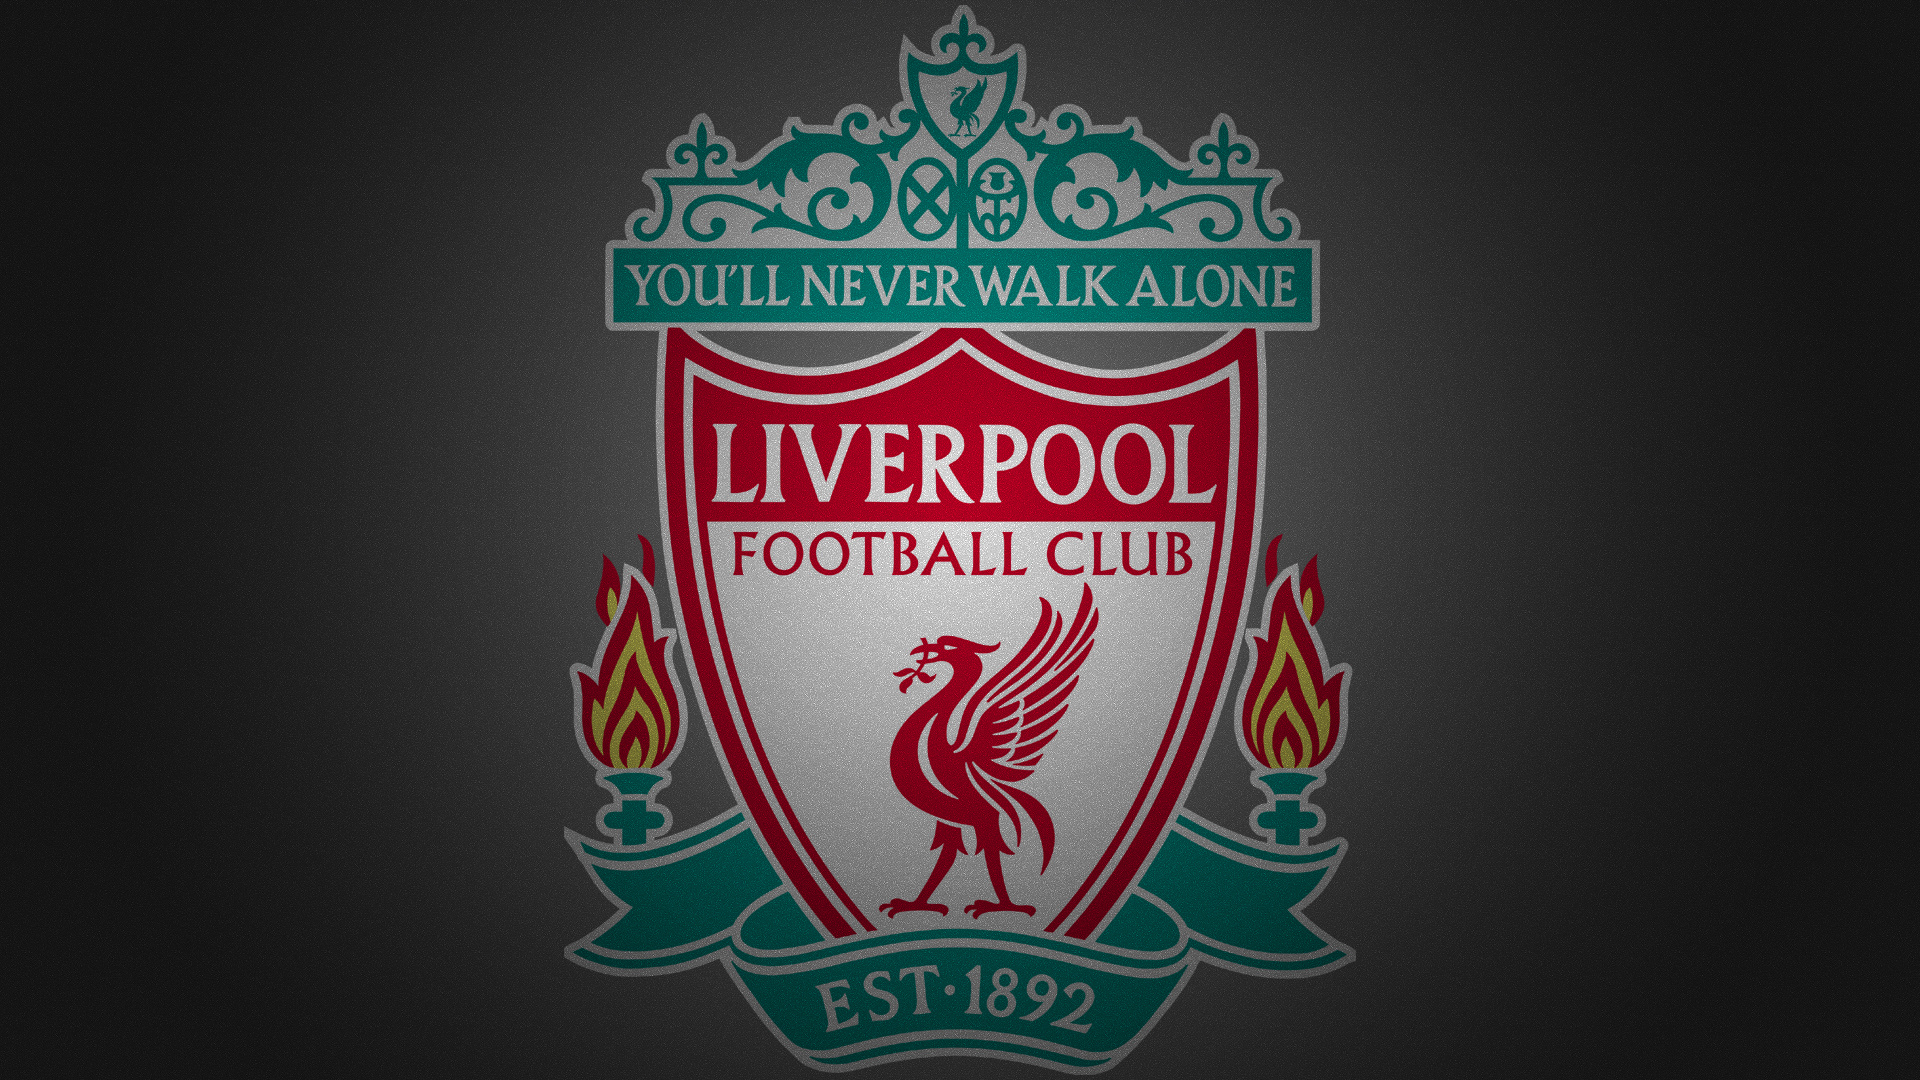 Liverpool Football Club: One of the most successful teams in the history of English football. 1920x1080 Full HD Wallpaper.